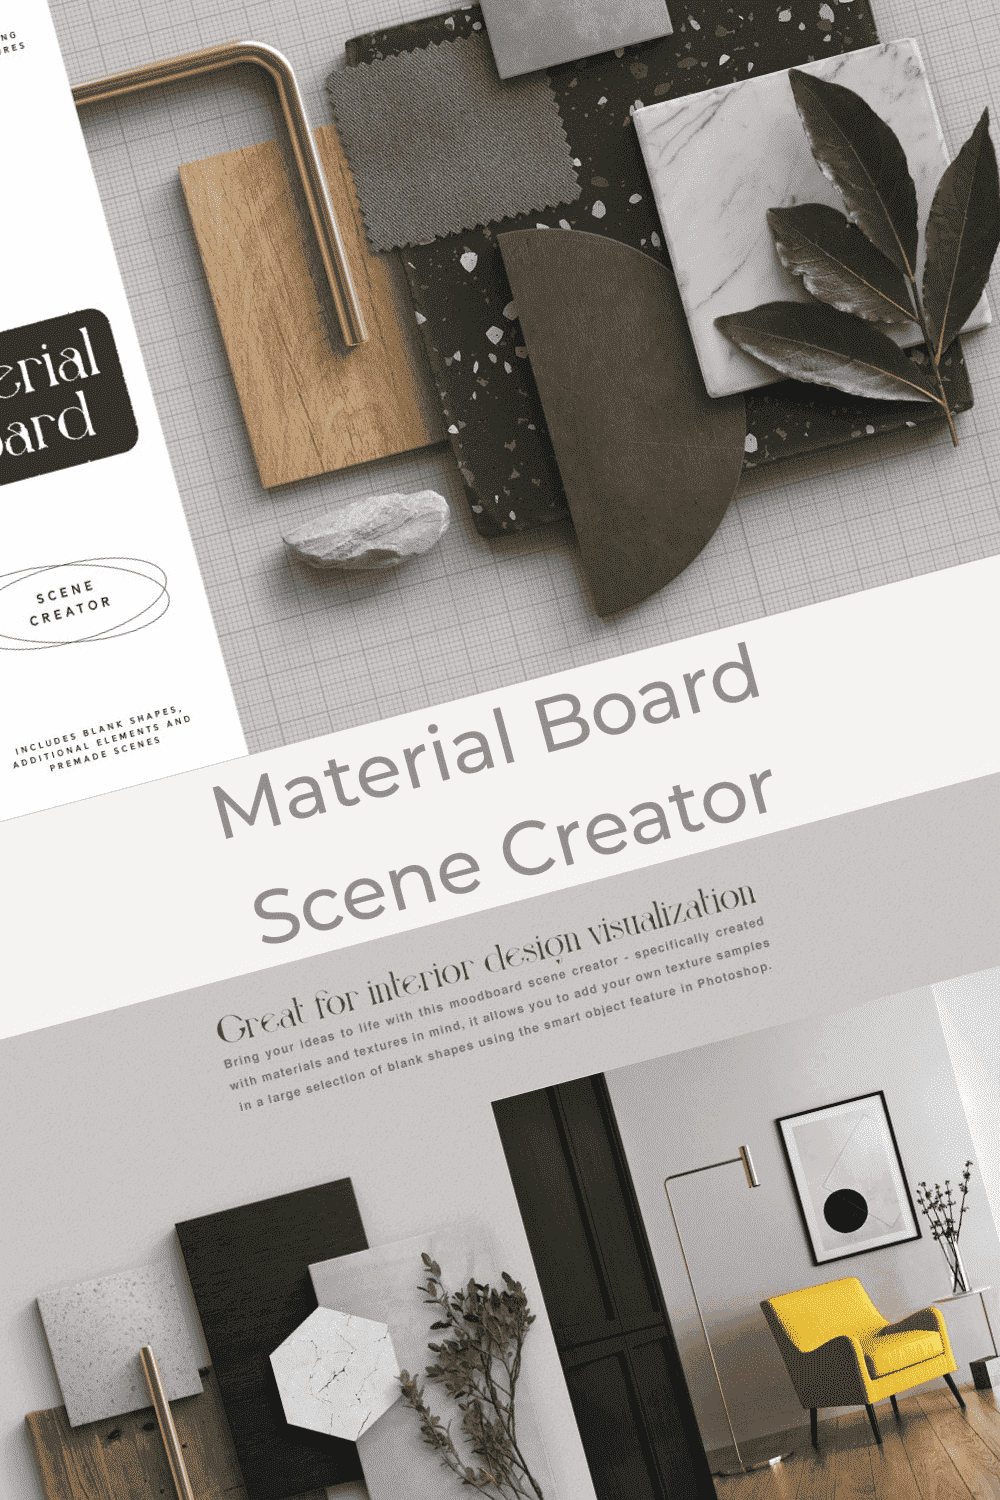 Material Board Scene Creator - "Bring Your Ideas To Life!".